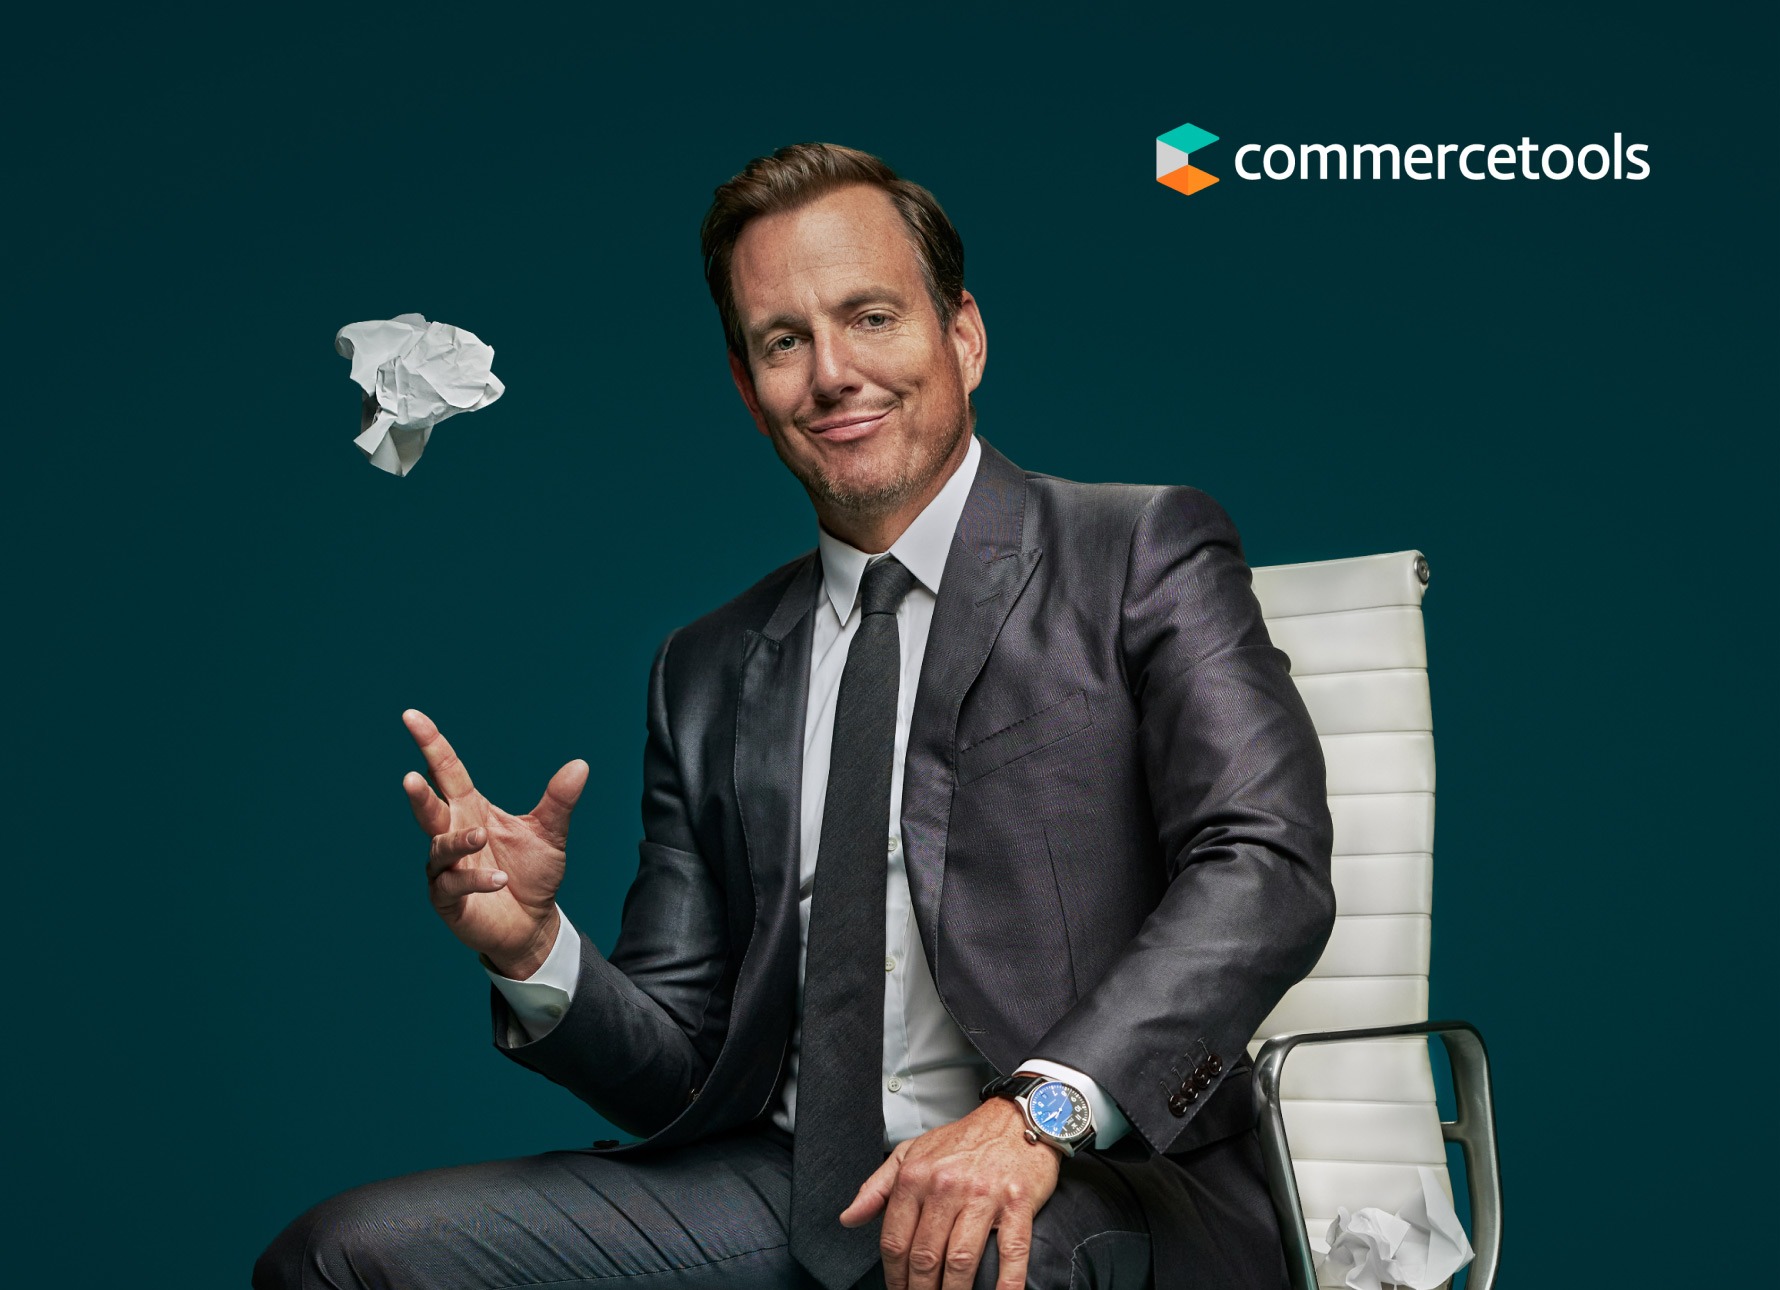 photo of will arnett as the naysayer throwing a piece of crumpled paper with the commercetools logo in the top right corner